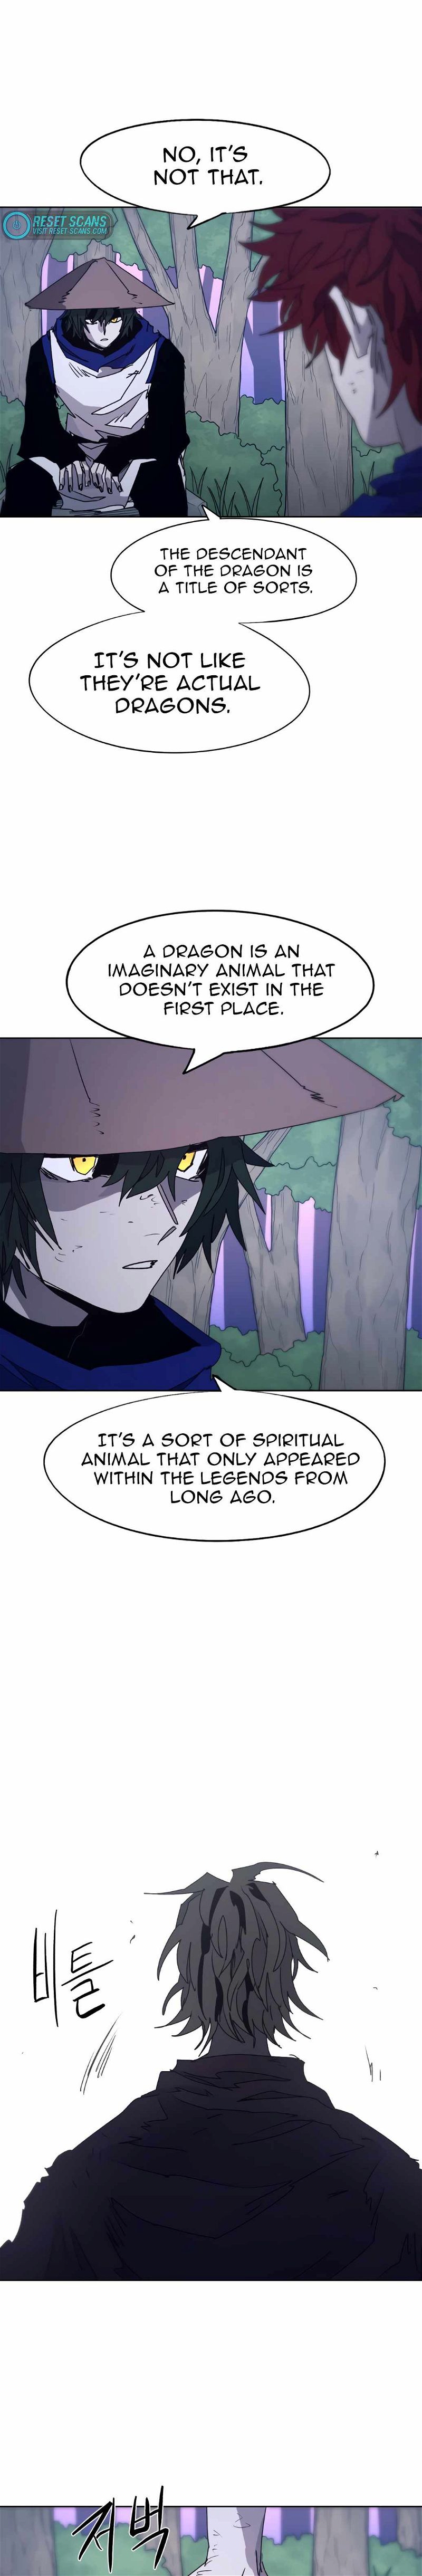 The Knight of Embers Chapter 80 page 5